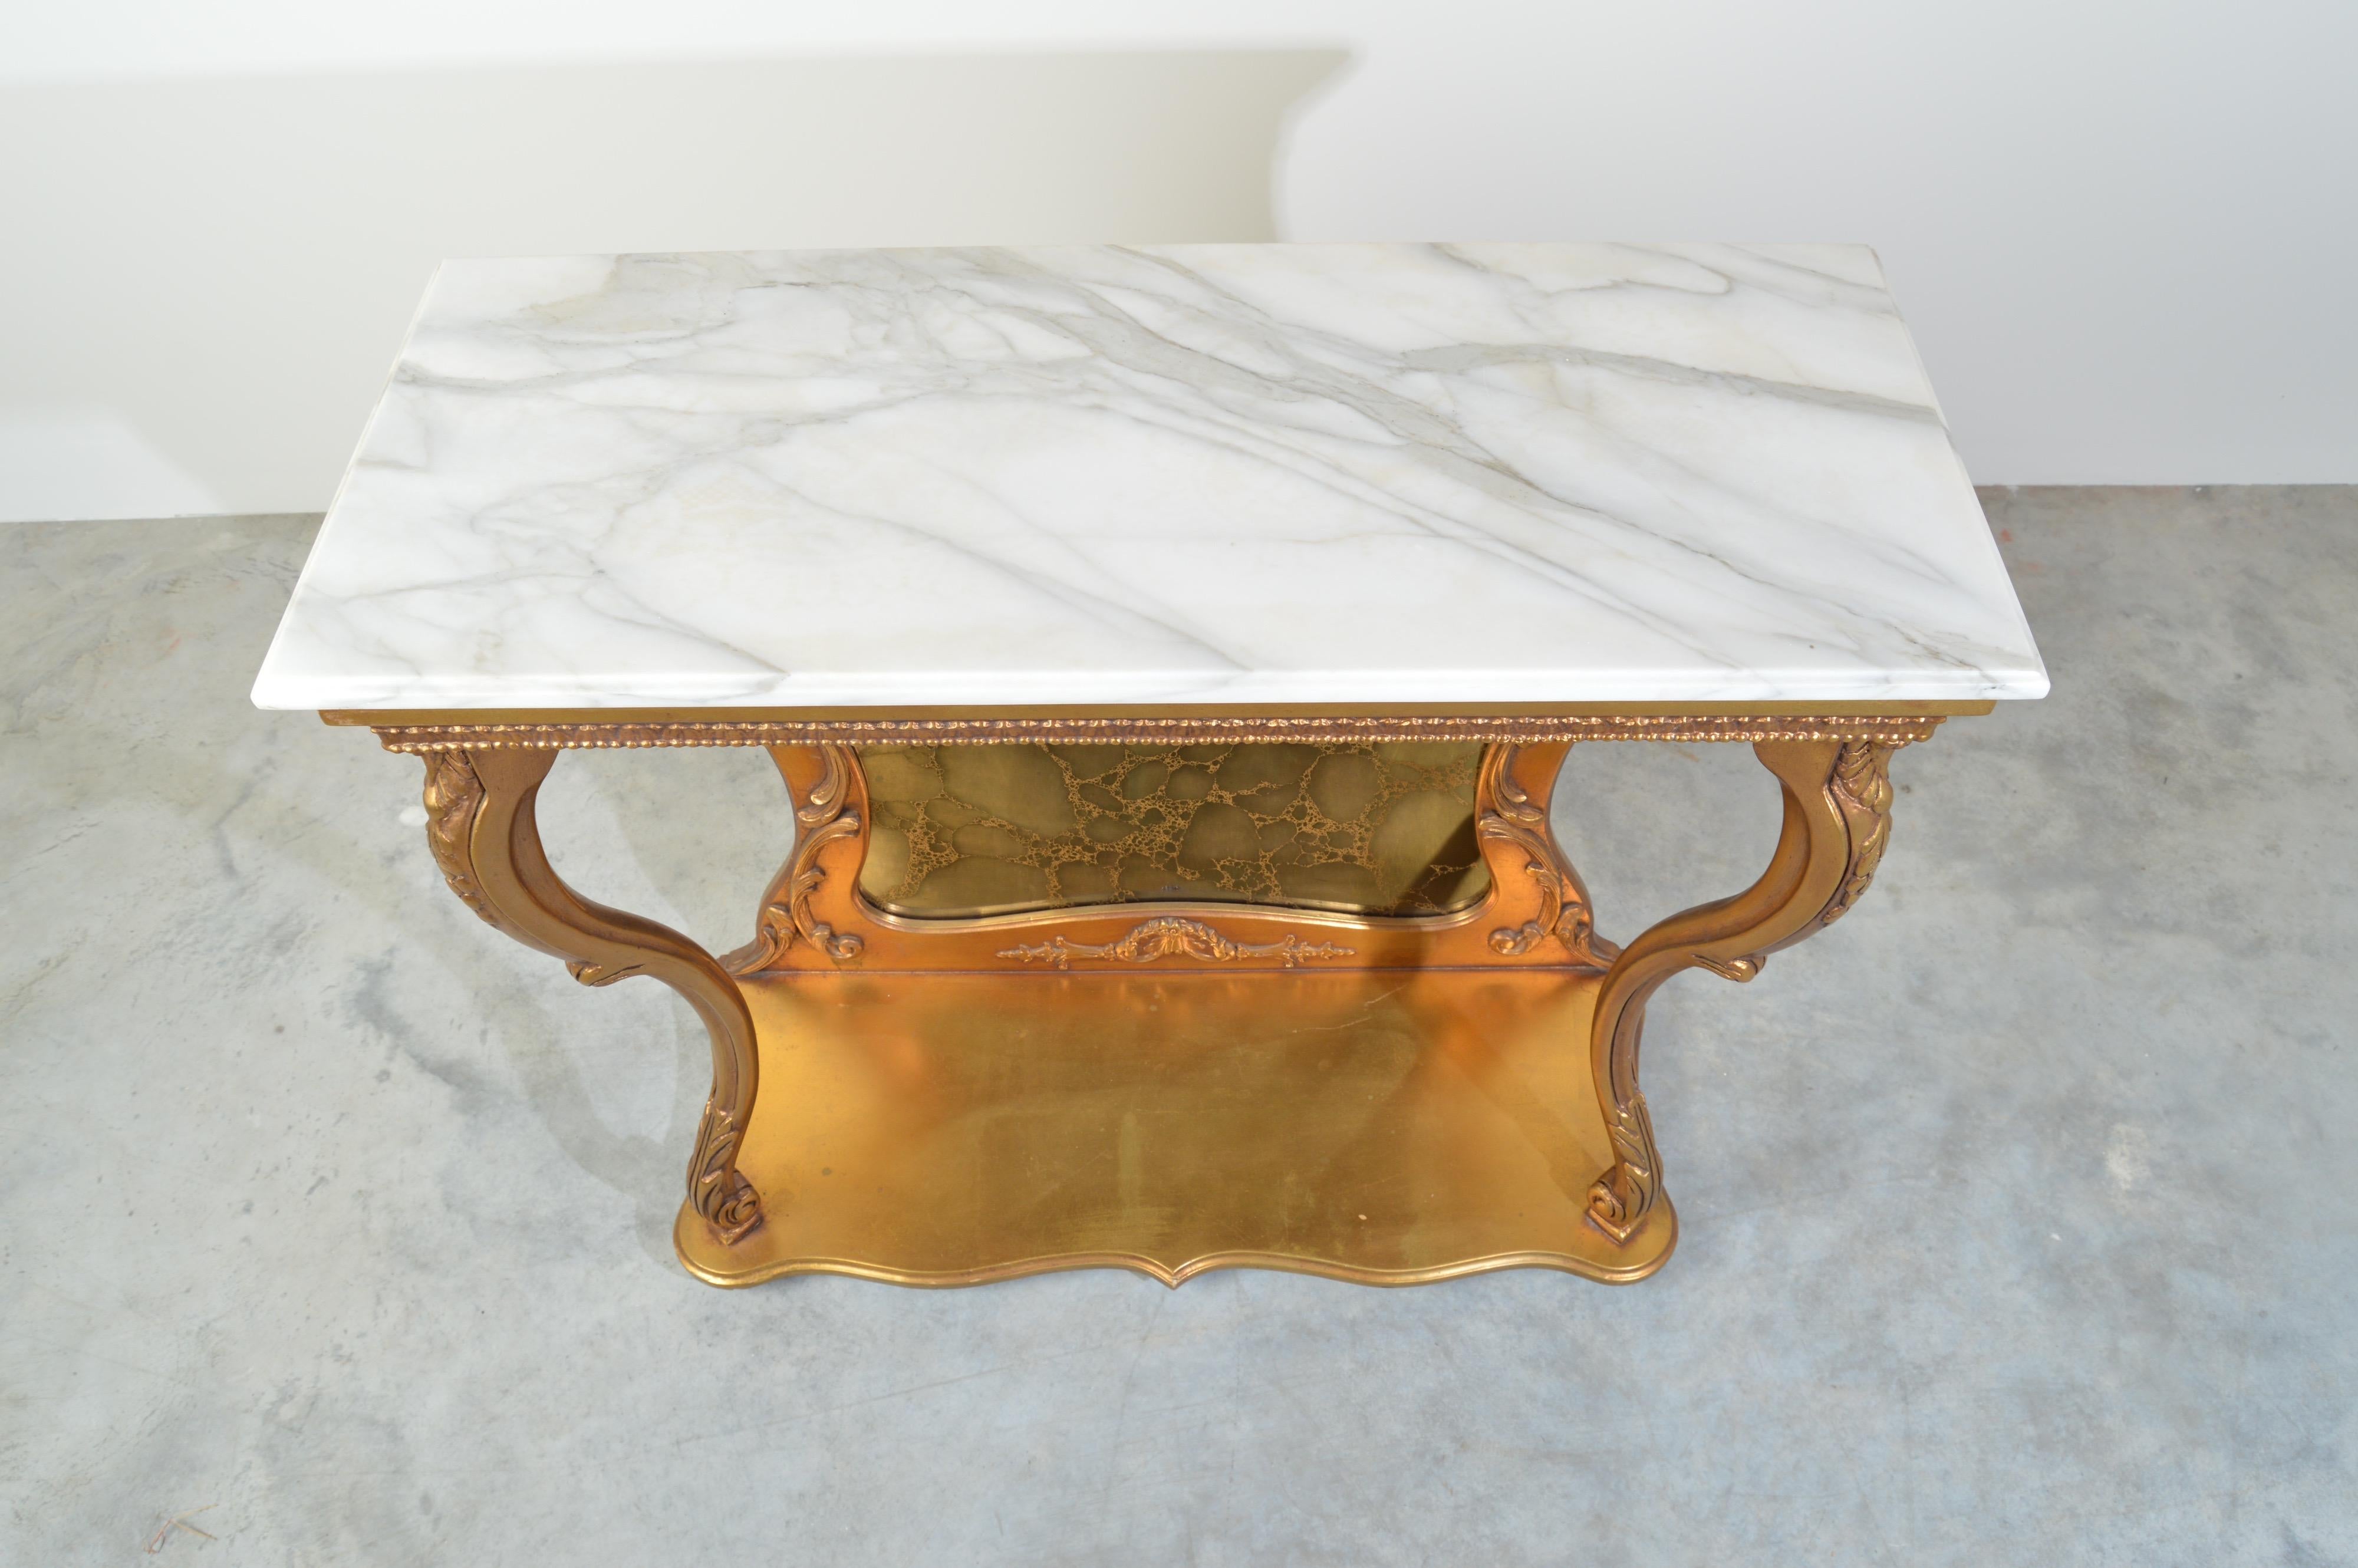 Gold gilt Louis XV style French marble top console table with antiqued mirror circa 1950.
Very nice condition having minor signs of age and use.
Clean and solid!